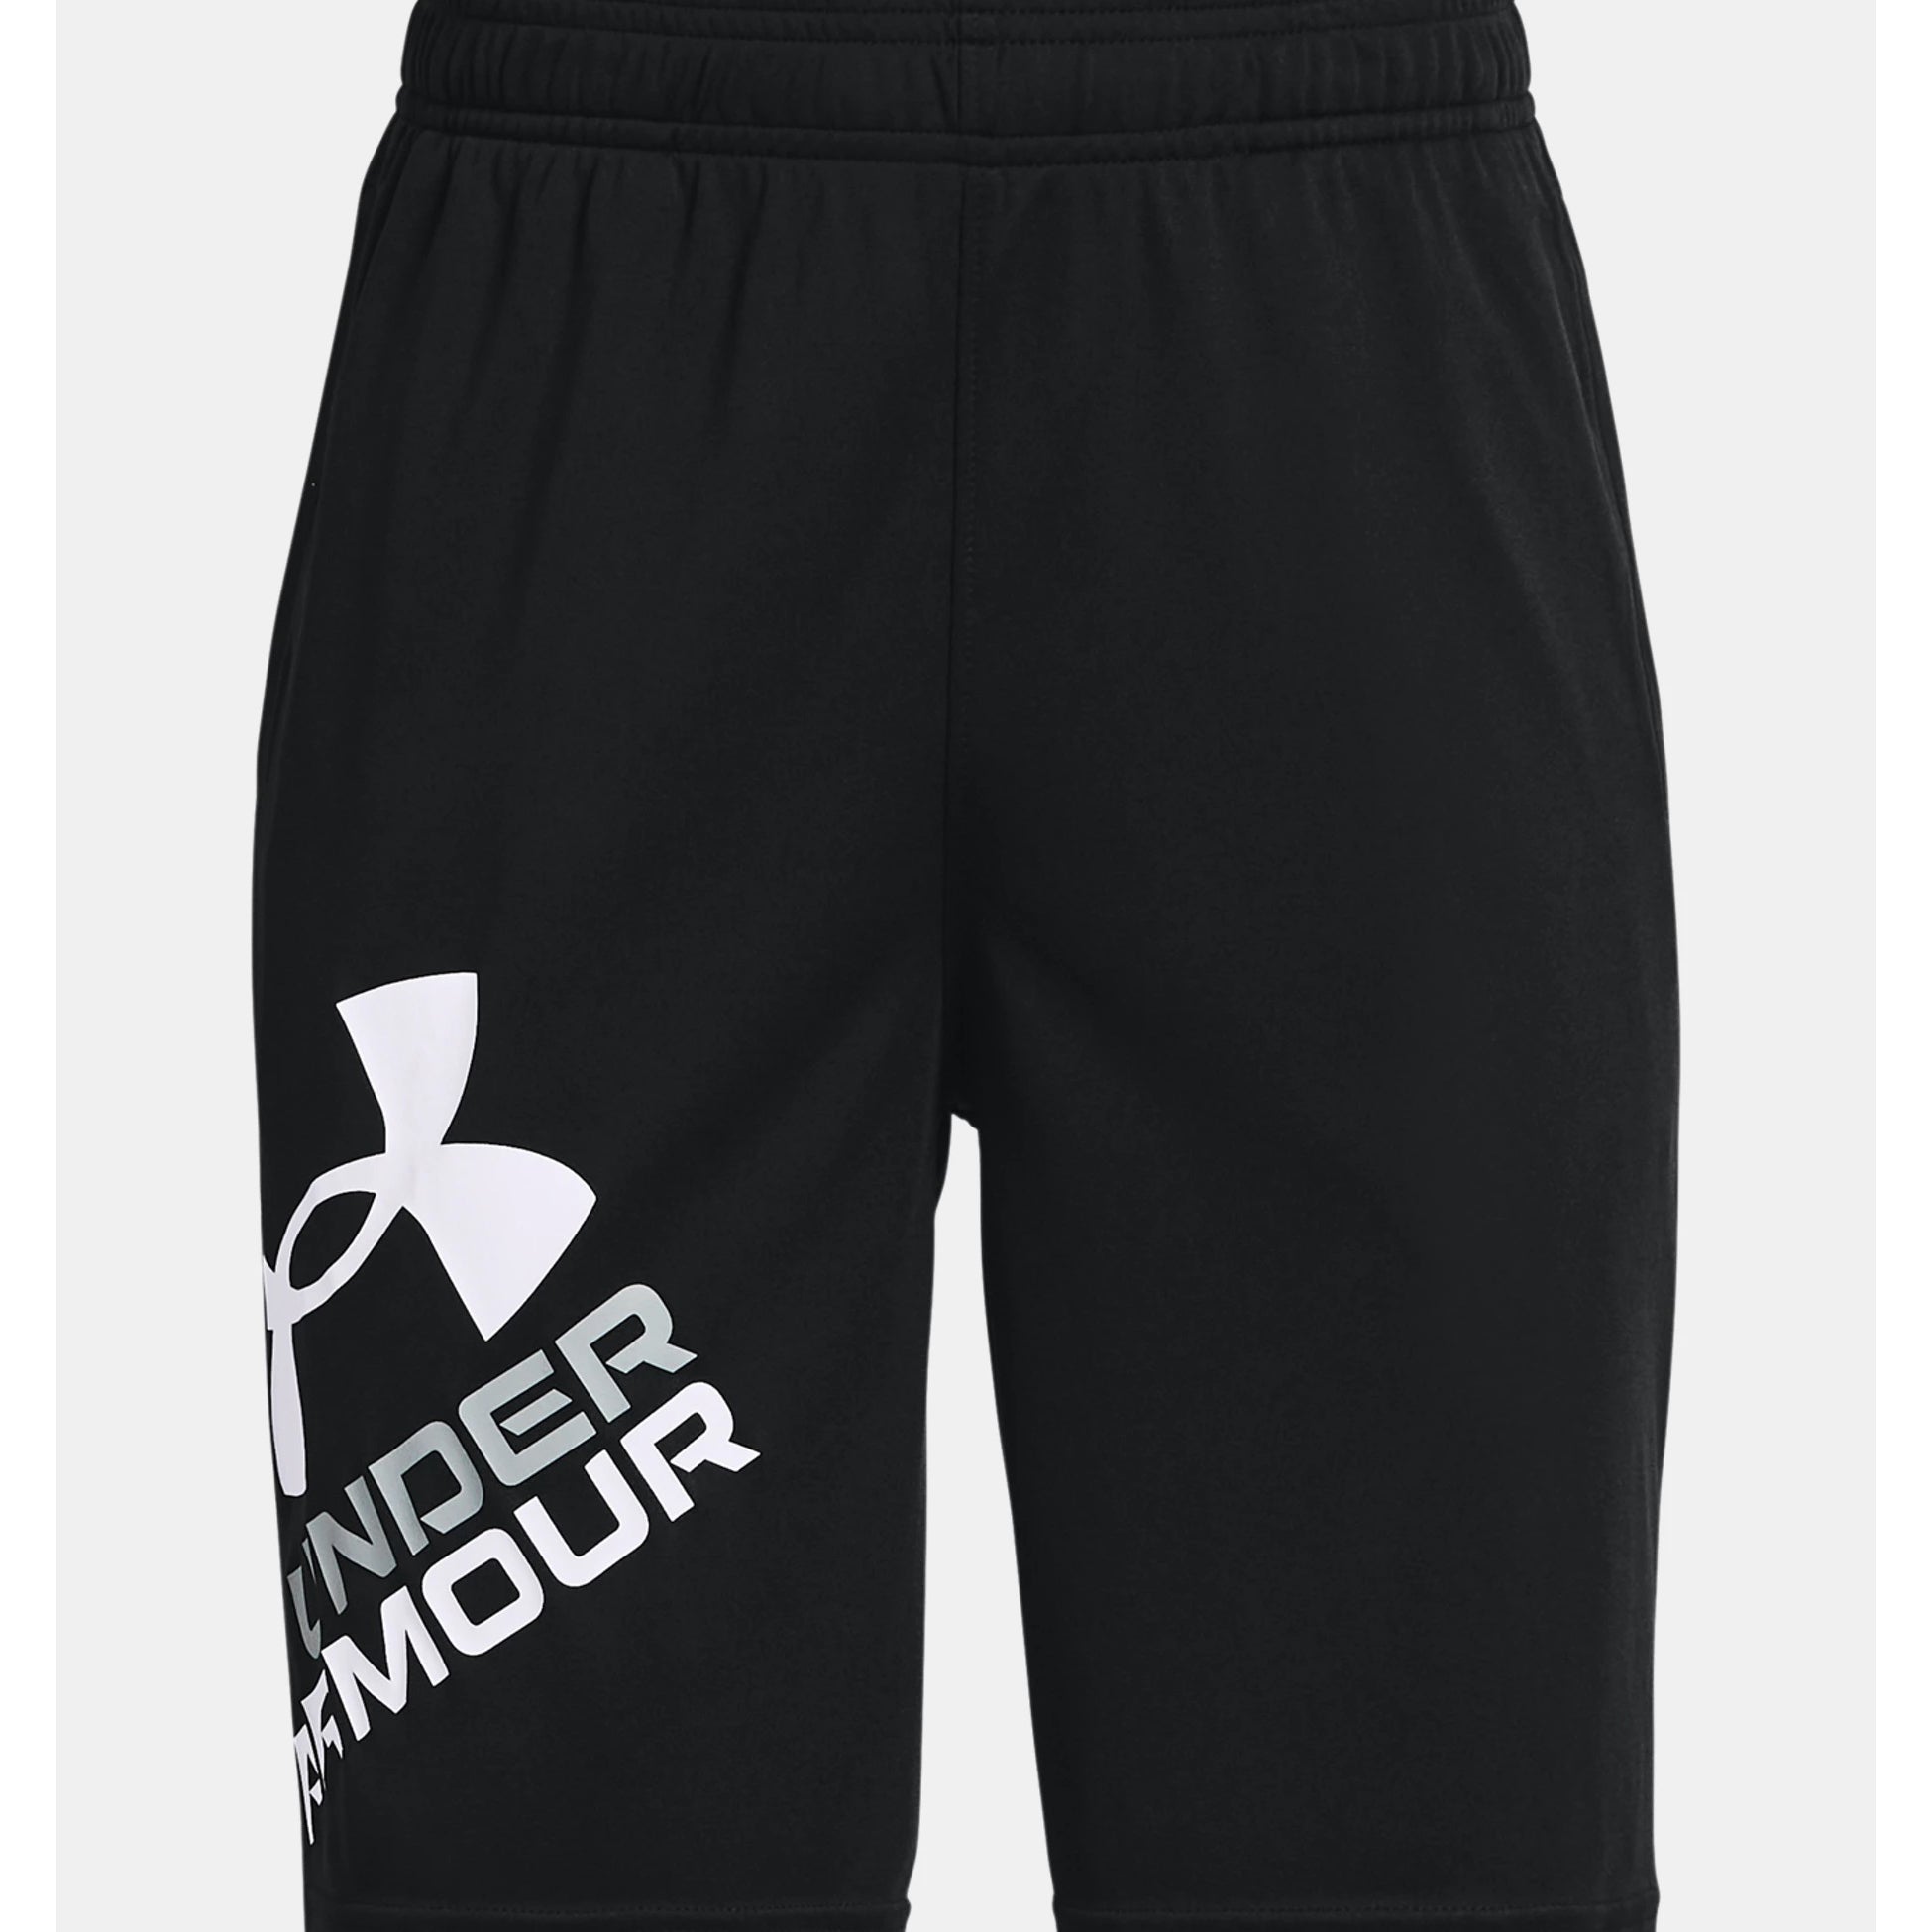 Under Armour Mens Rival Fleece Shorts, (001) Black / / White, X-Small at   Men's Clothing store